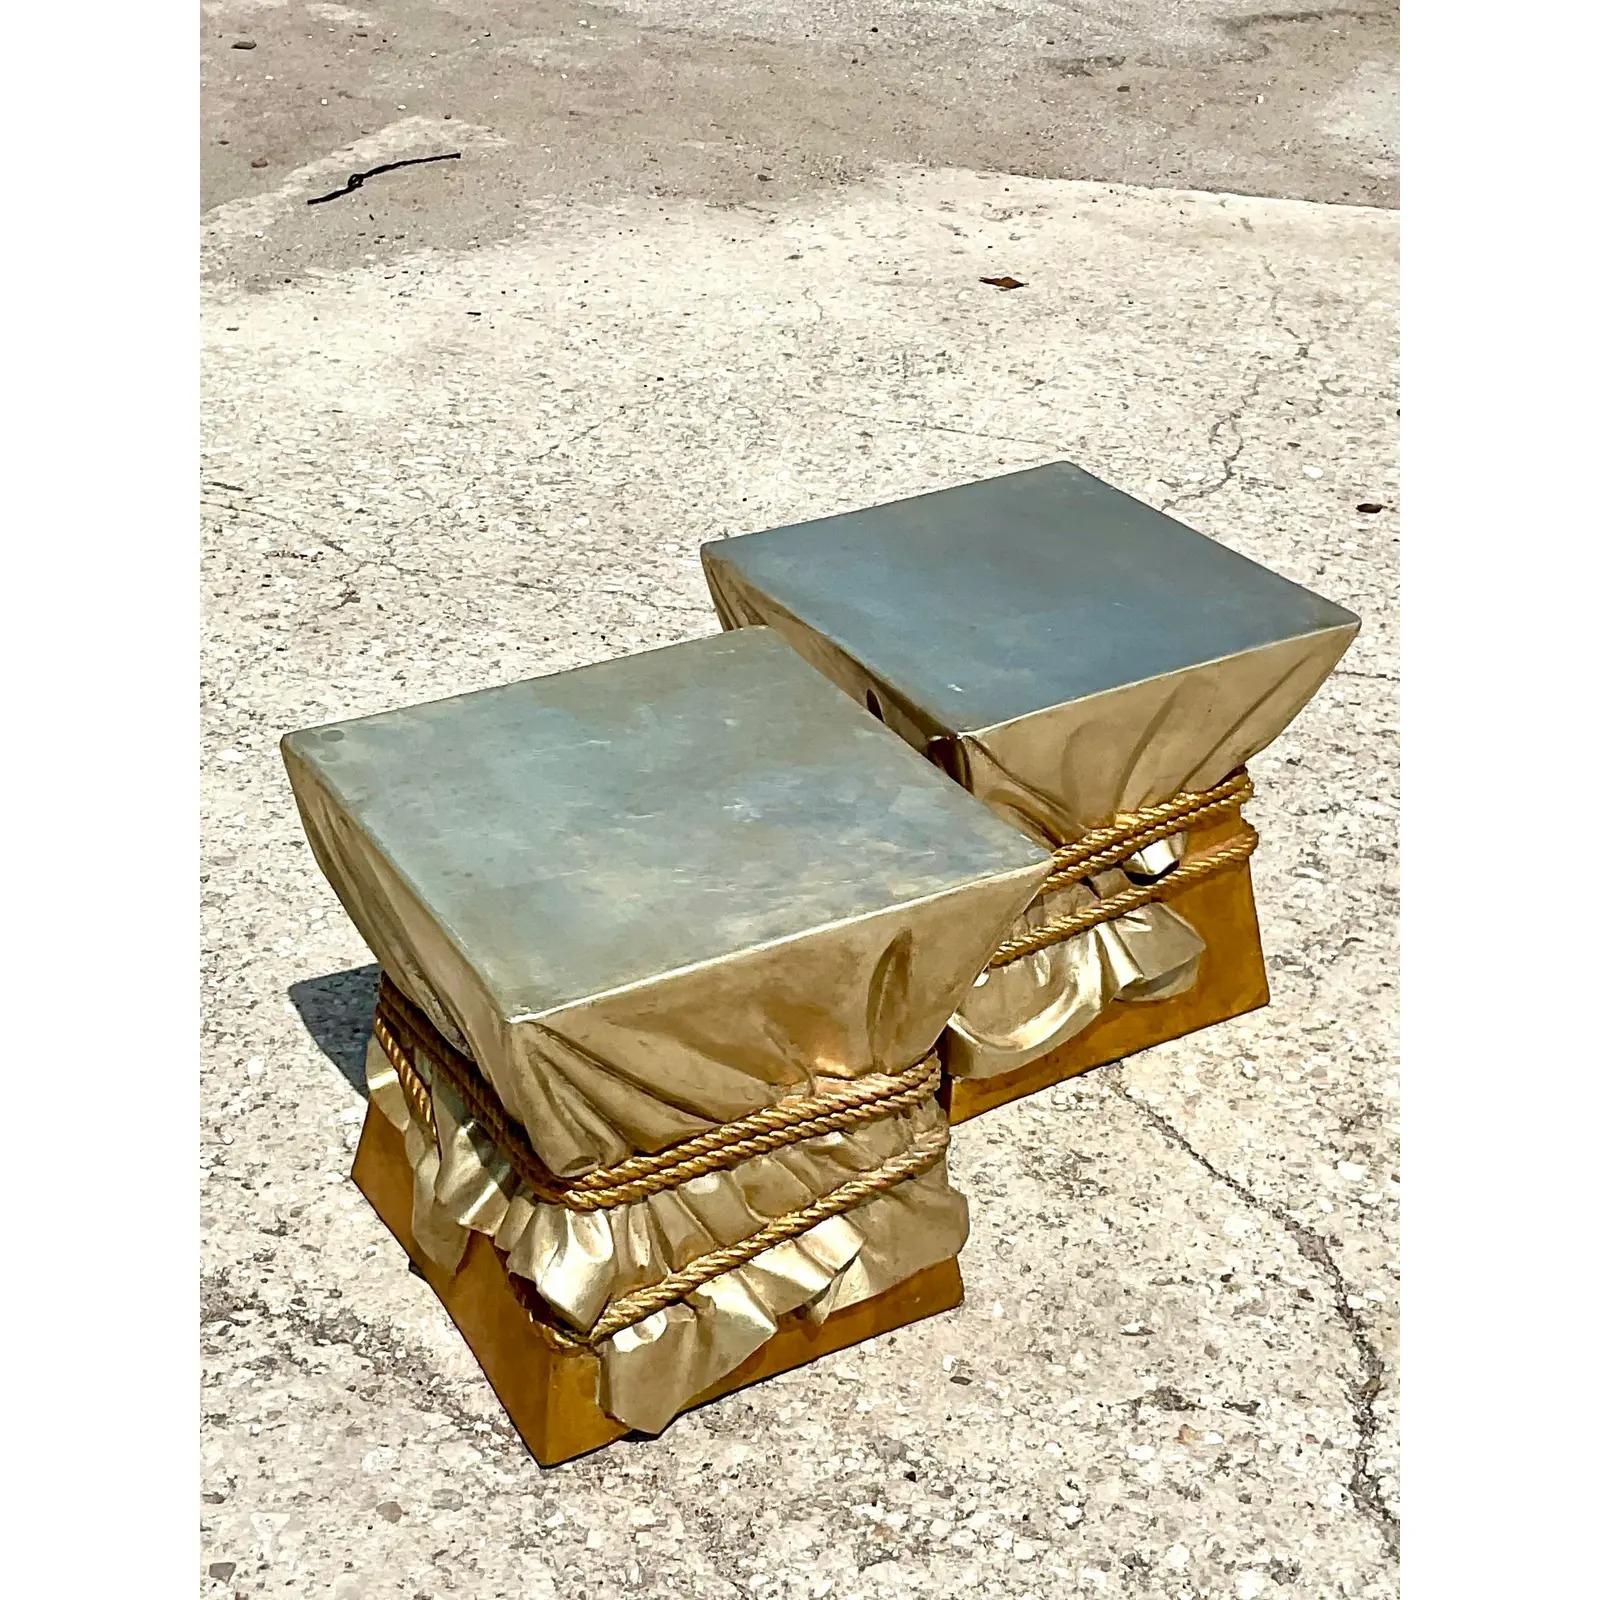 Fantastic pair of molded resin stools. Done in the style of the iconic John Dickinson. Beautiful molded resin in two shades of gold. A fun and dramatic addition to any décor. Acquired from a Miami estate.